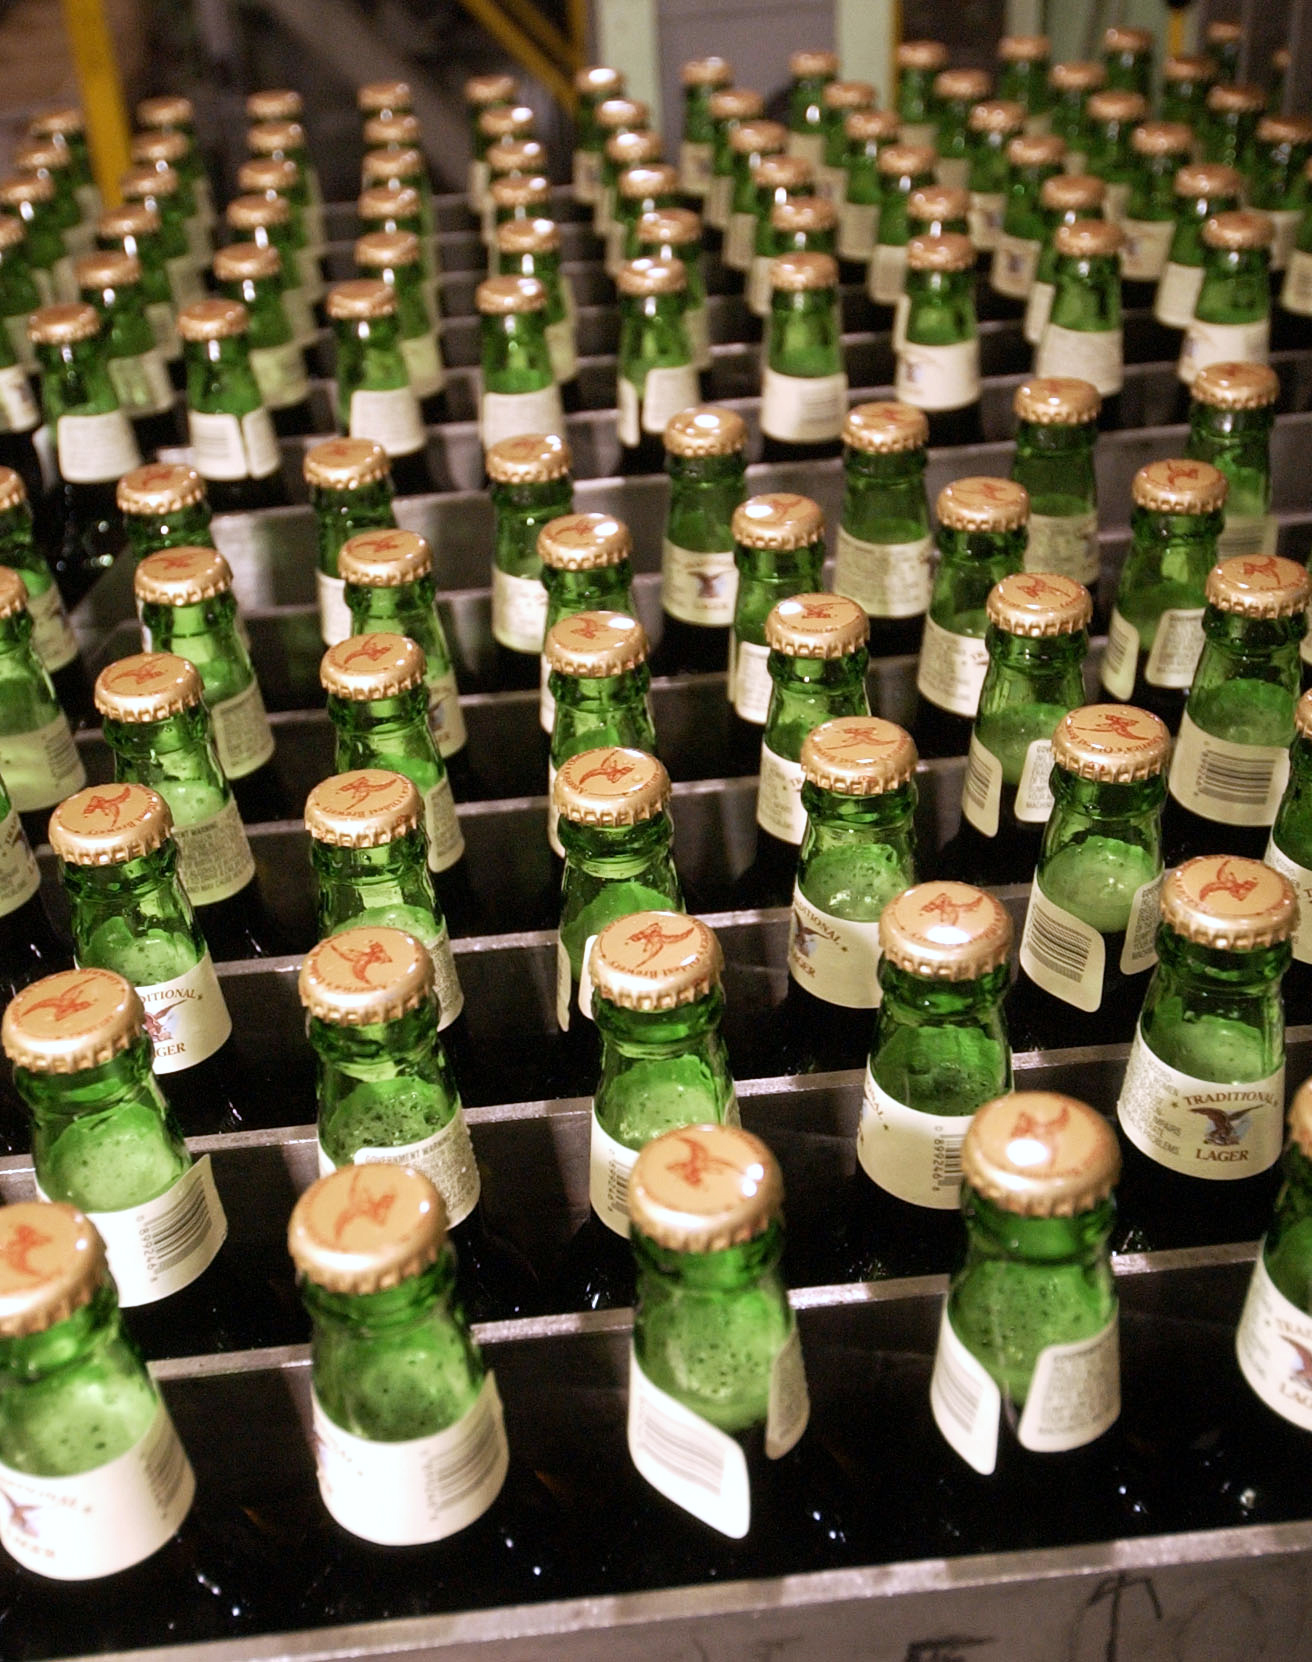 Full bottles of lager await to be loaded into cases at the Yuengling brewery in Pottsville, Pennsylvania on June 29, 2005. (Bloomberg—Bloomberg via Getty Images)